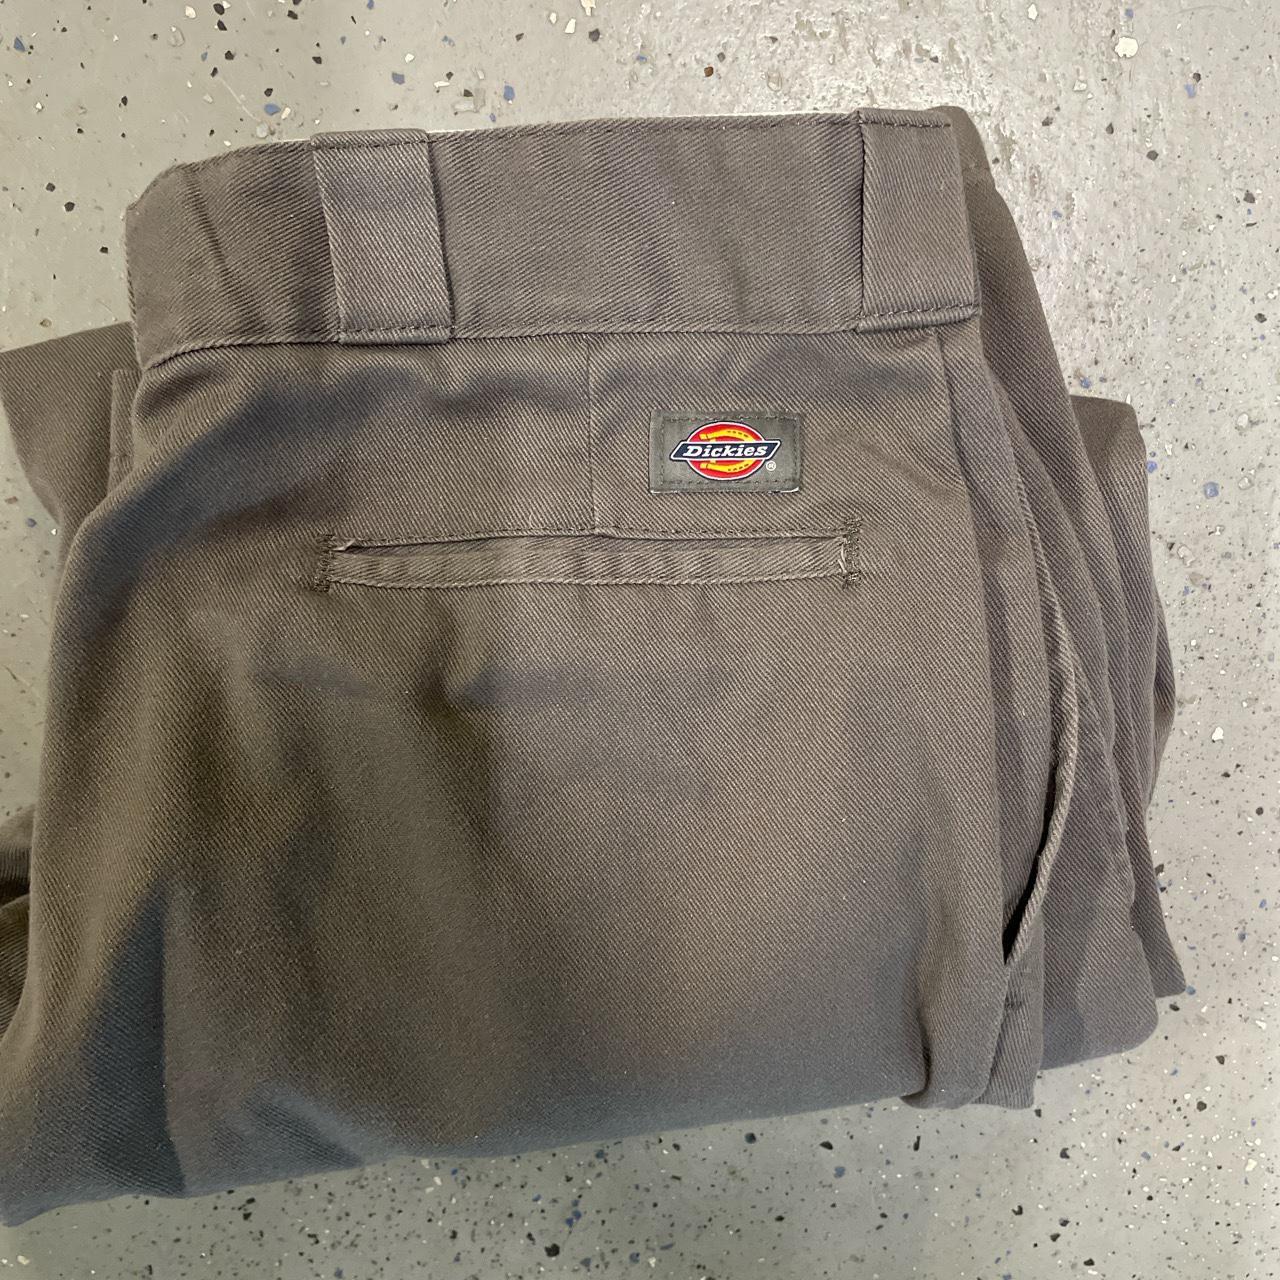 Grey Dickies Pants Flex 2 Sizes 40 And 36 2 For 25... - Depop